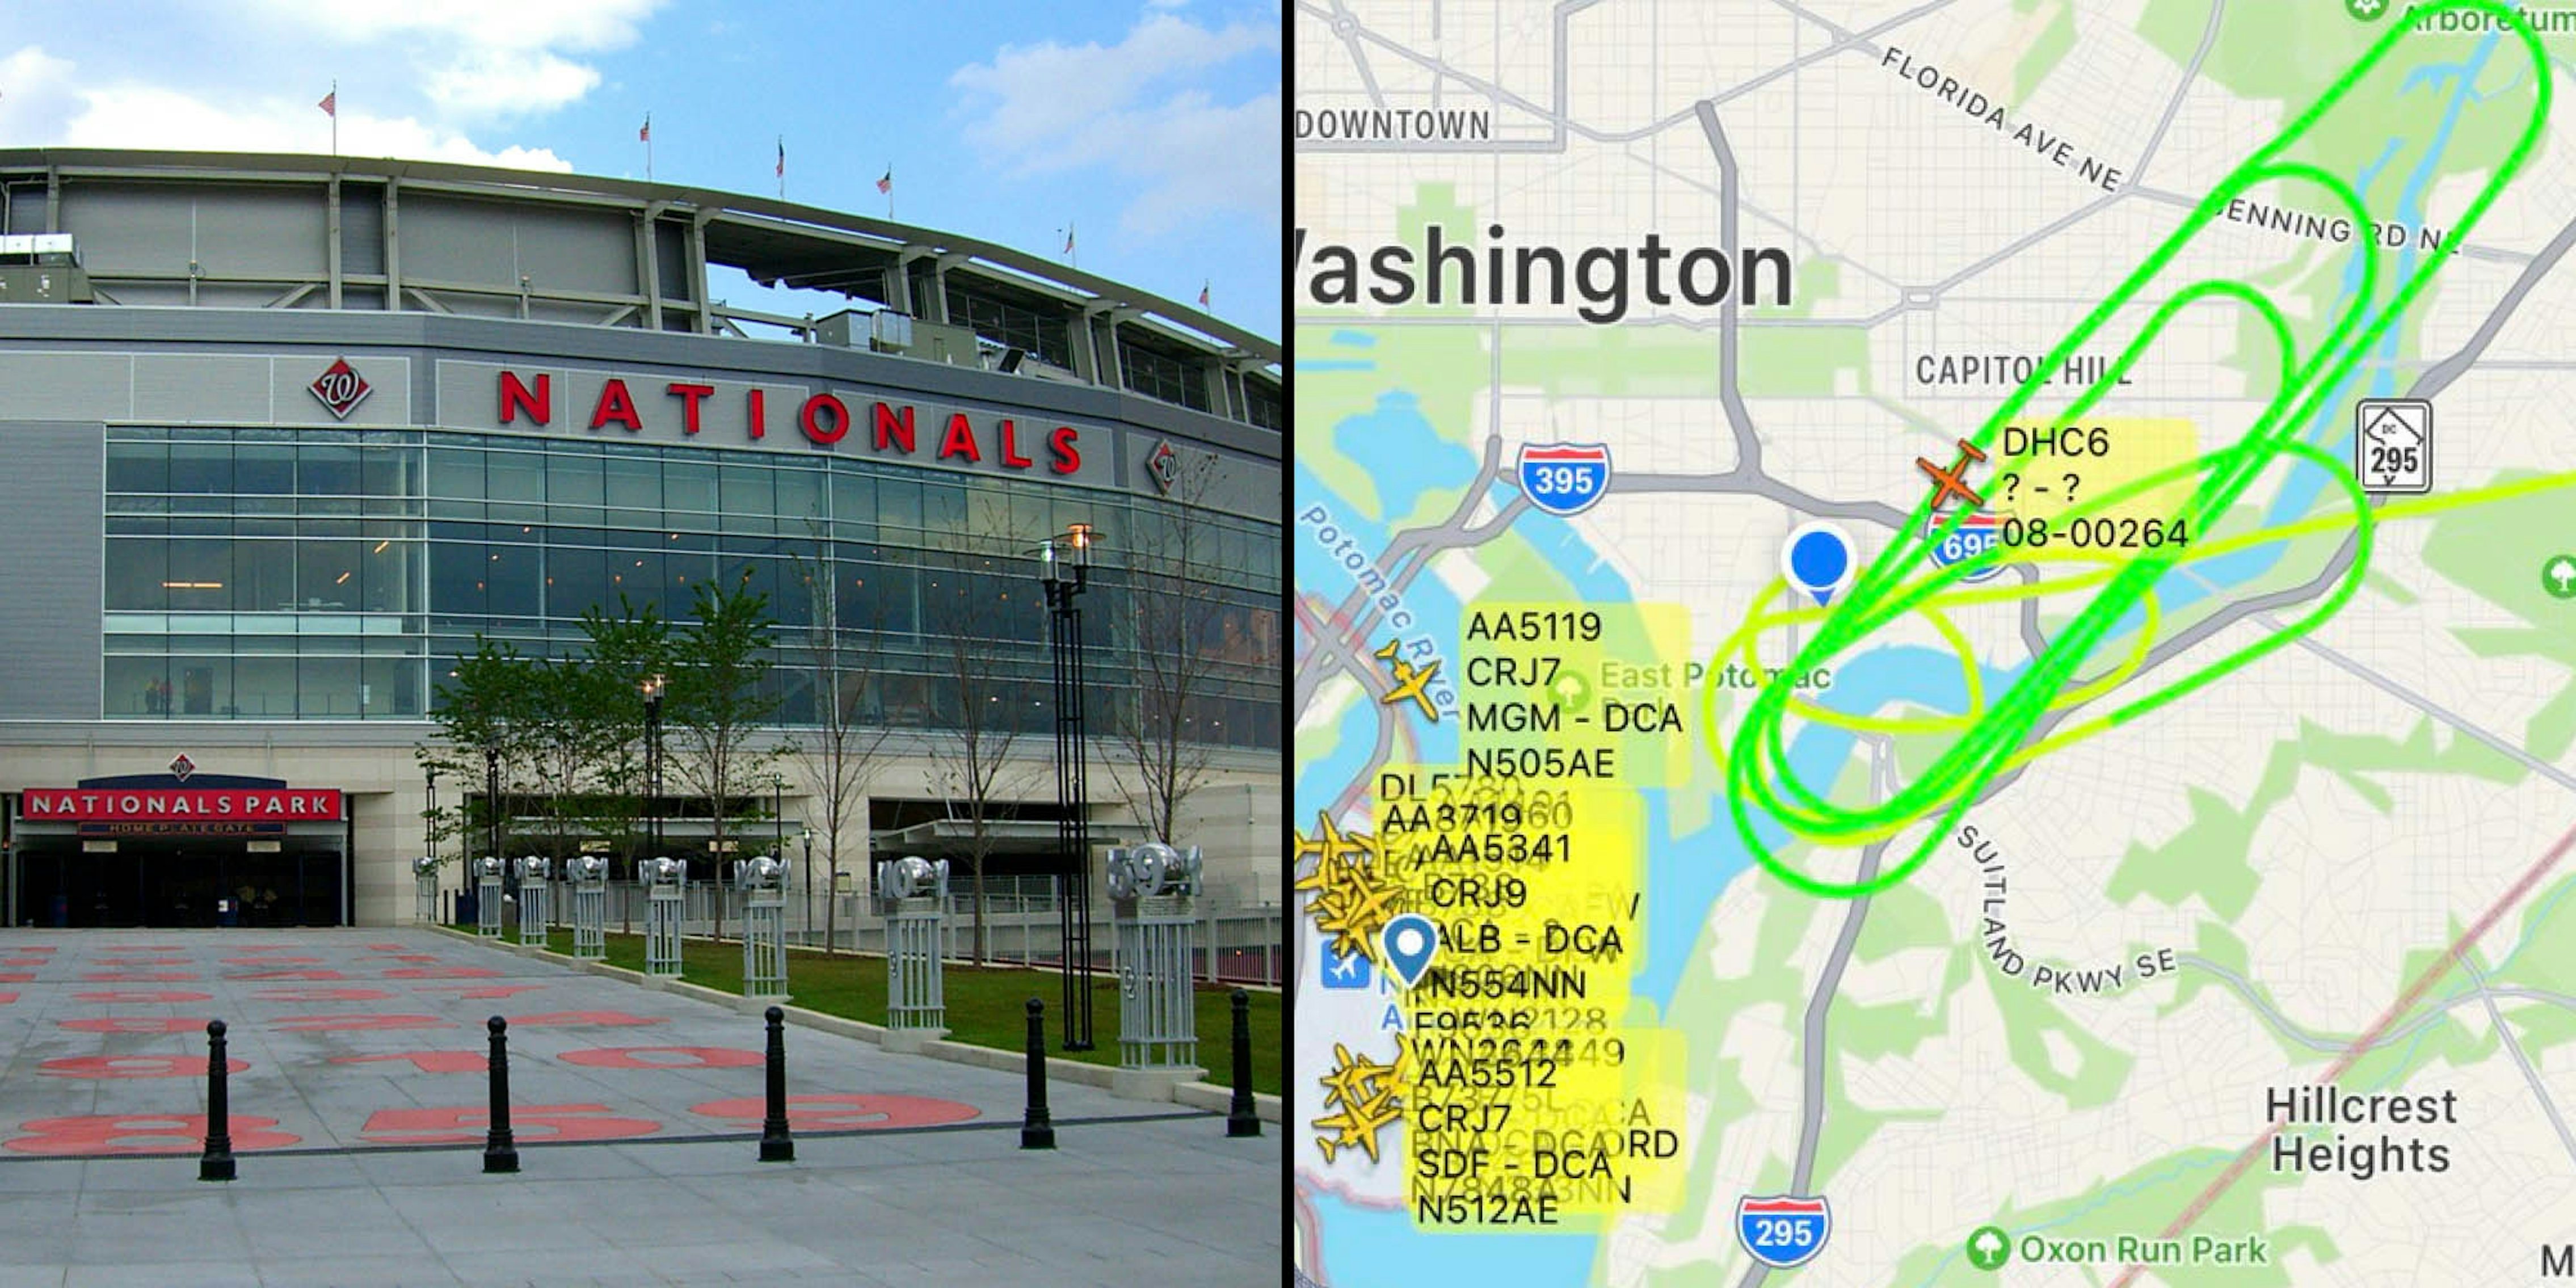 Nationals Park Stadium building outside (l) Map of Washington displaying plane routes (r)